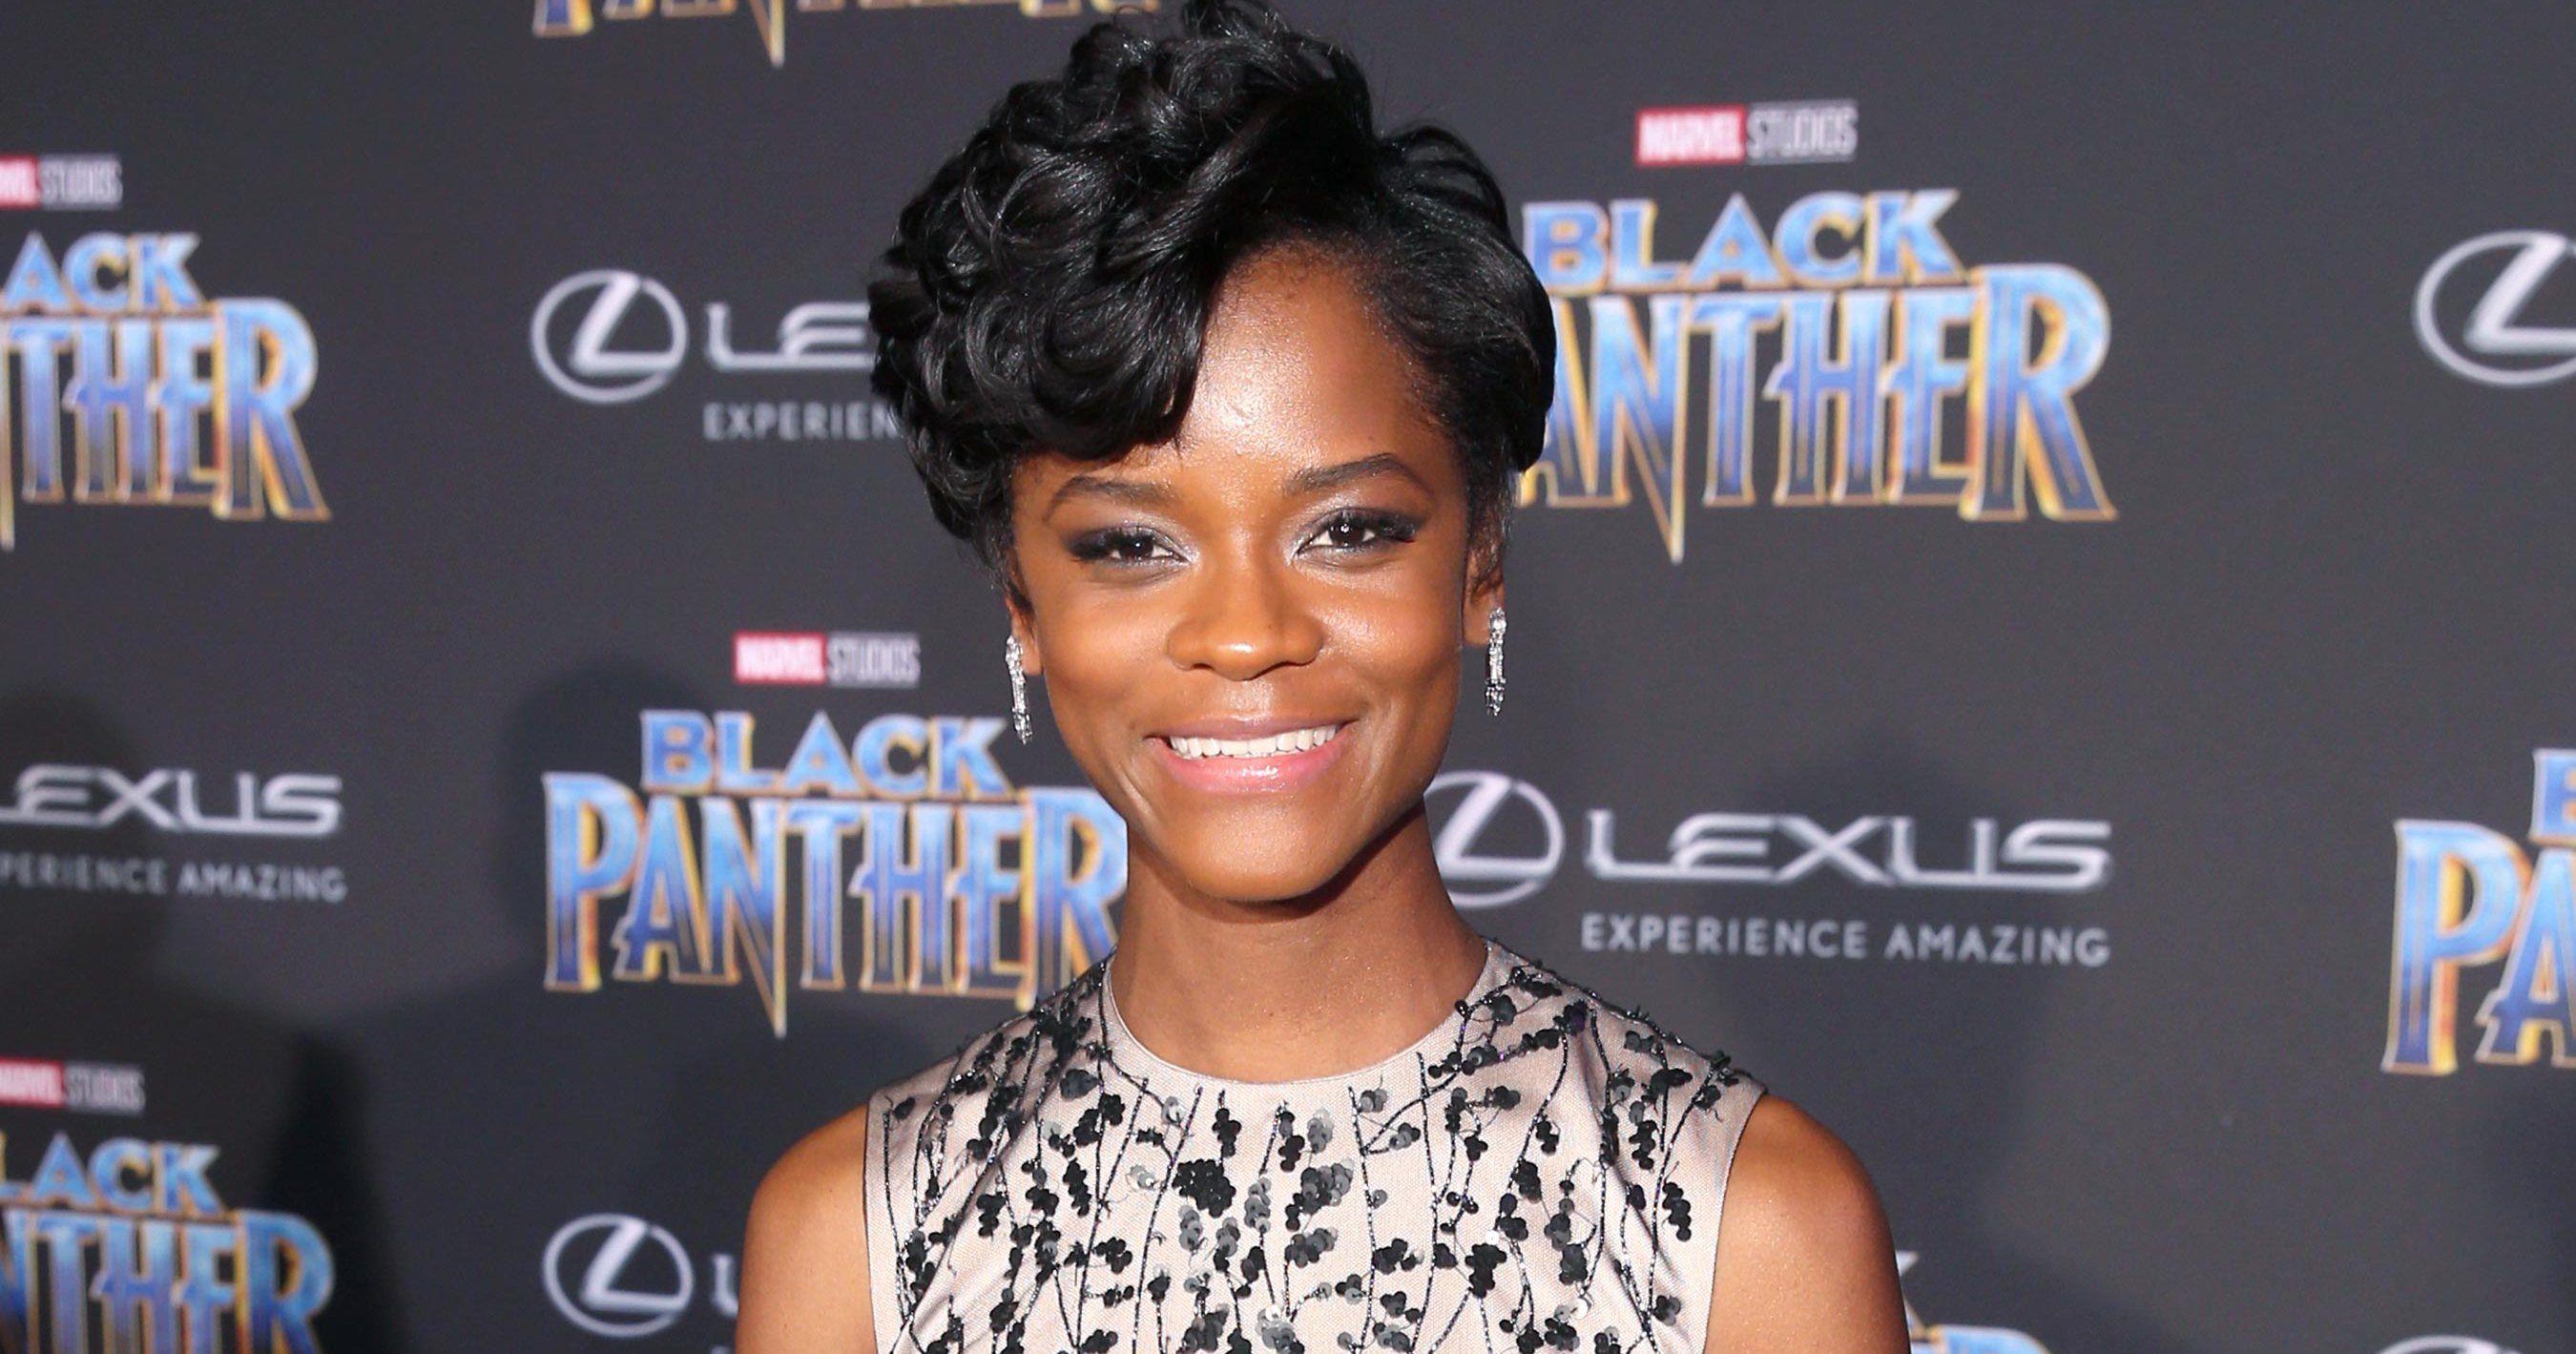 things to know about Black Panther breakout star Letitia Wright